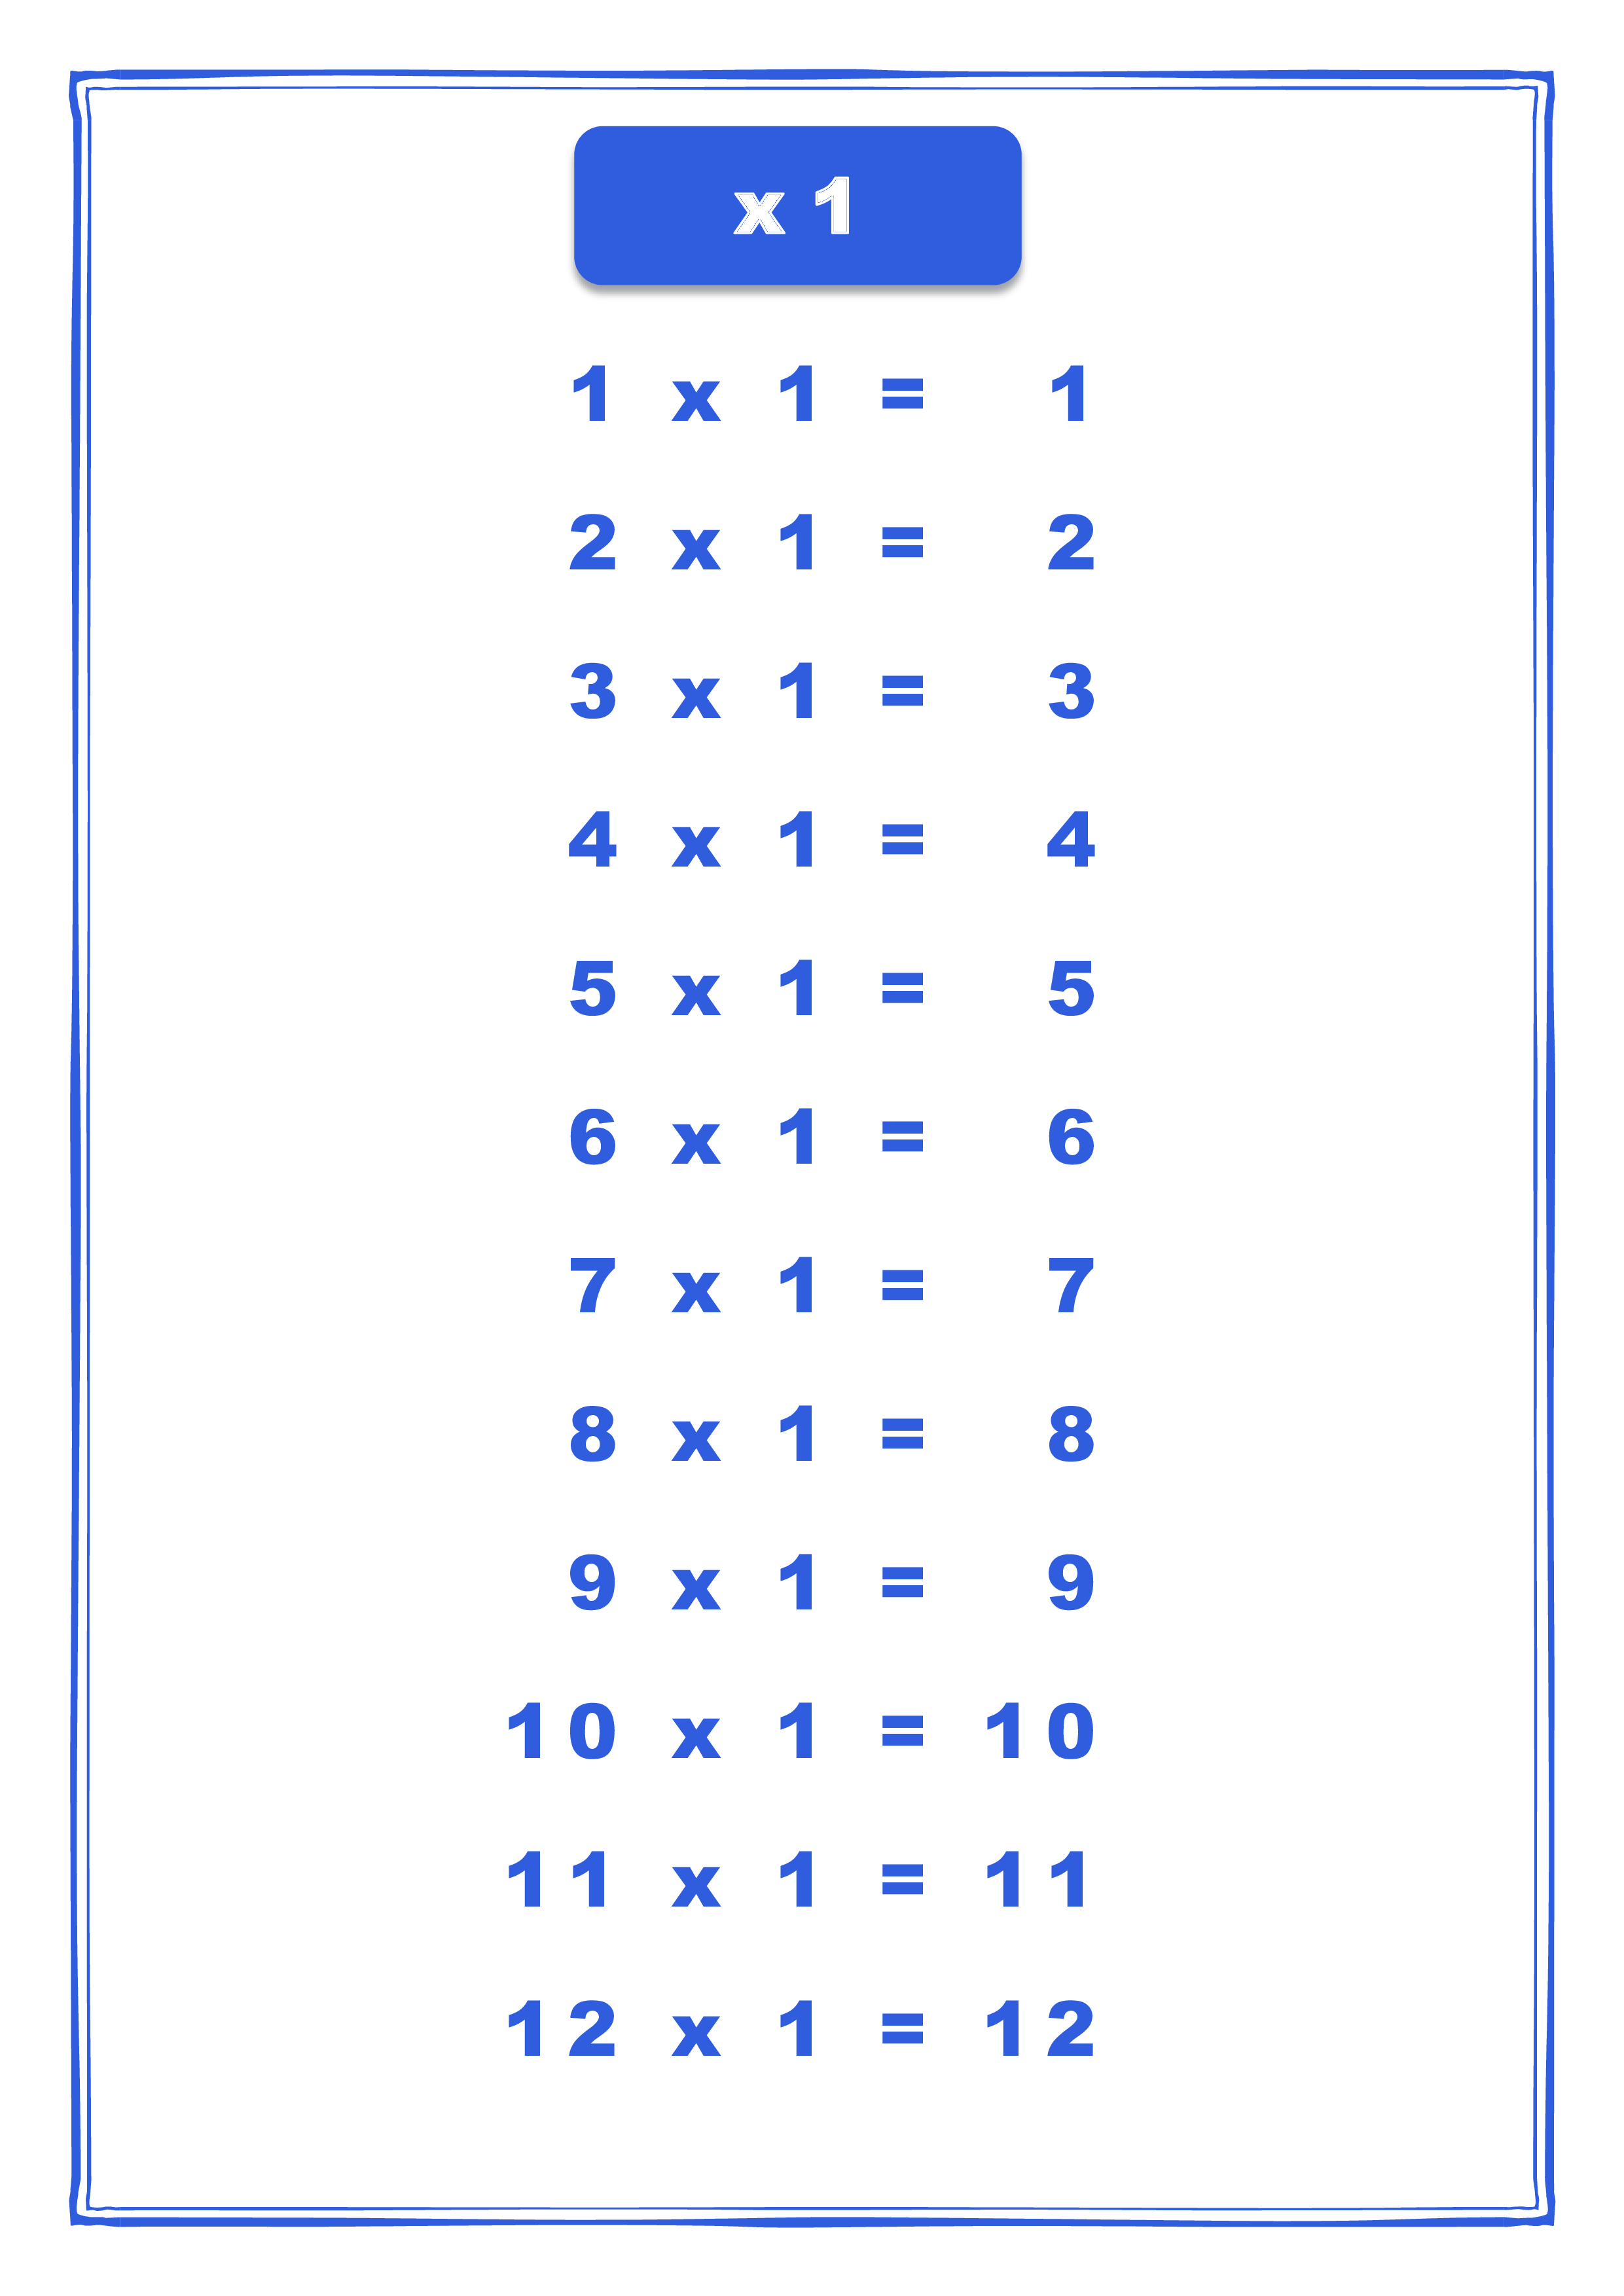 x1 times table chart template